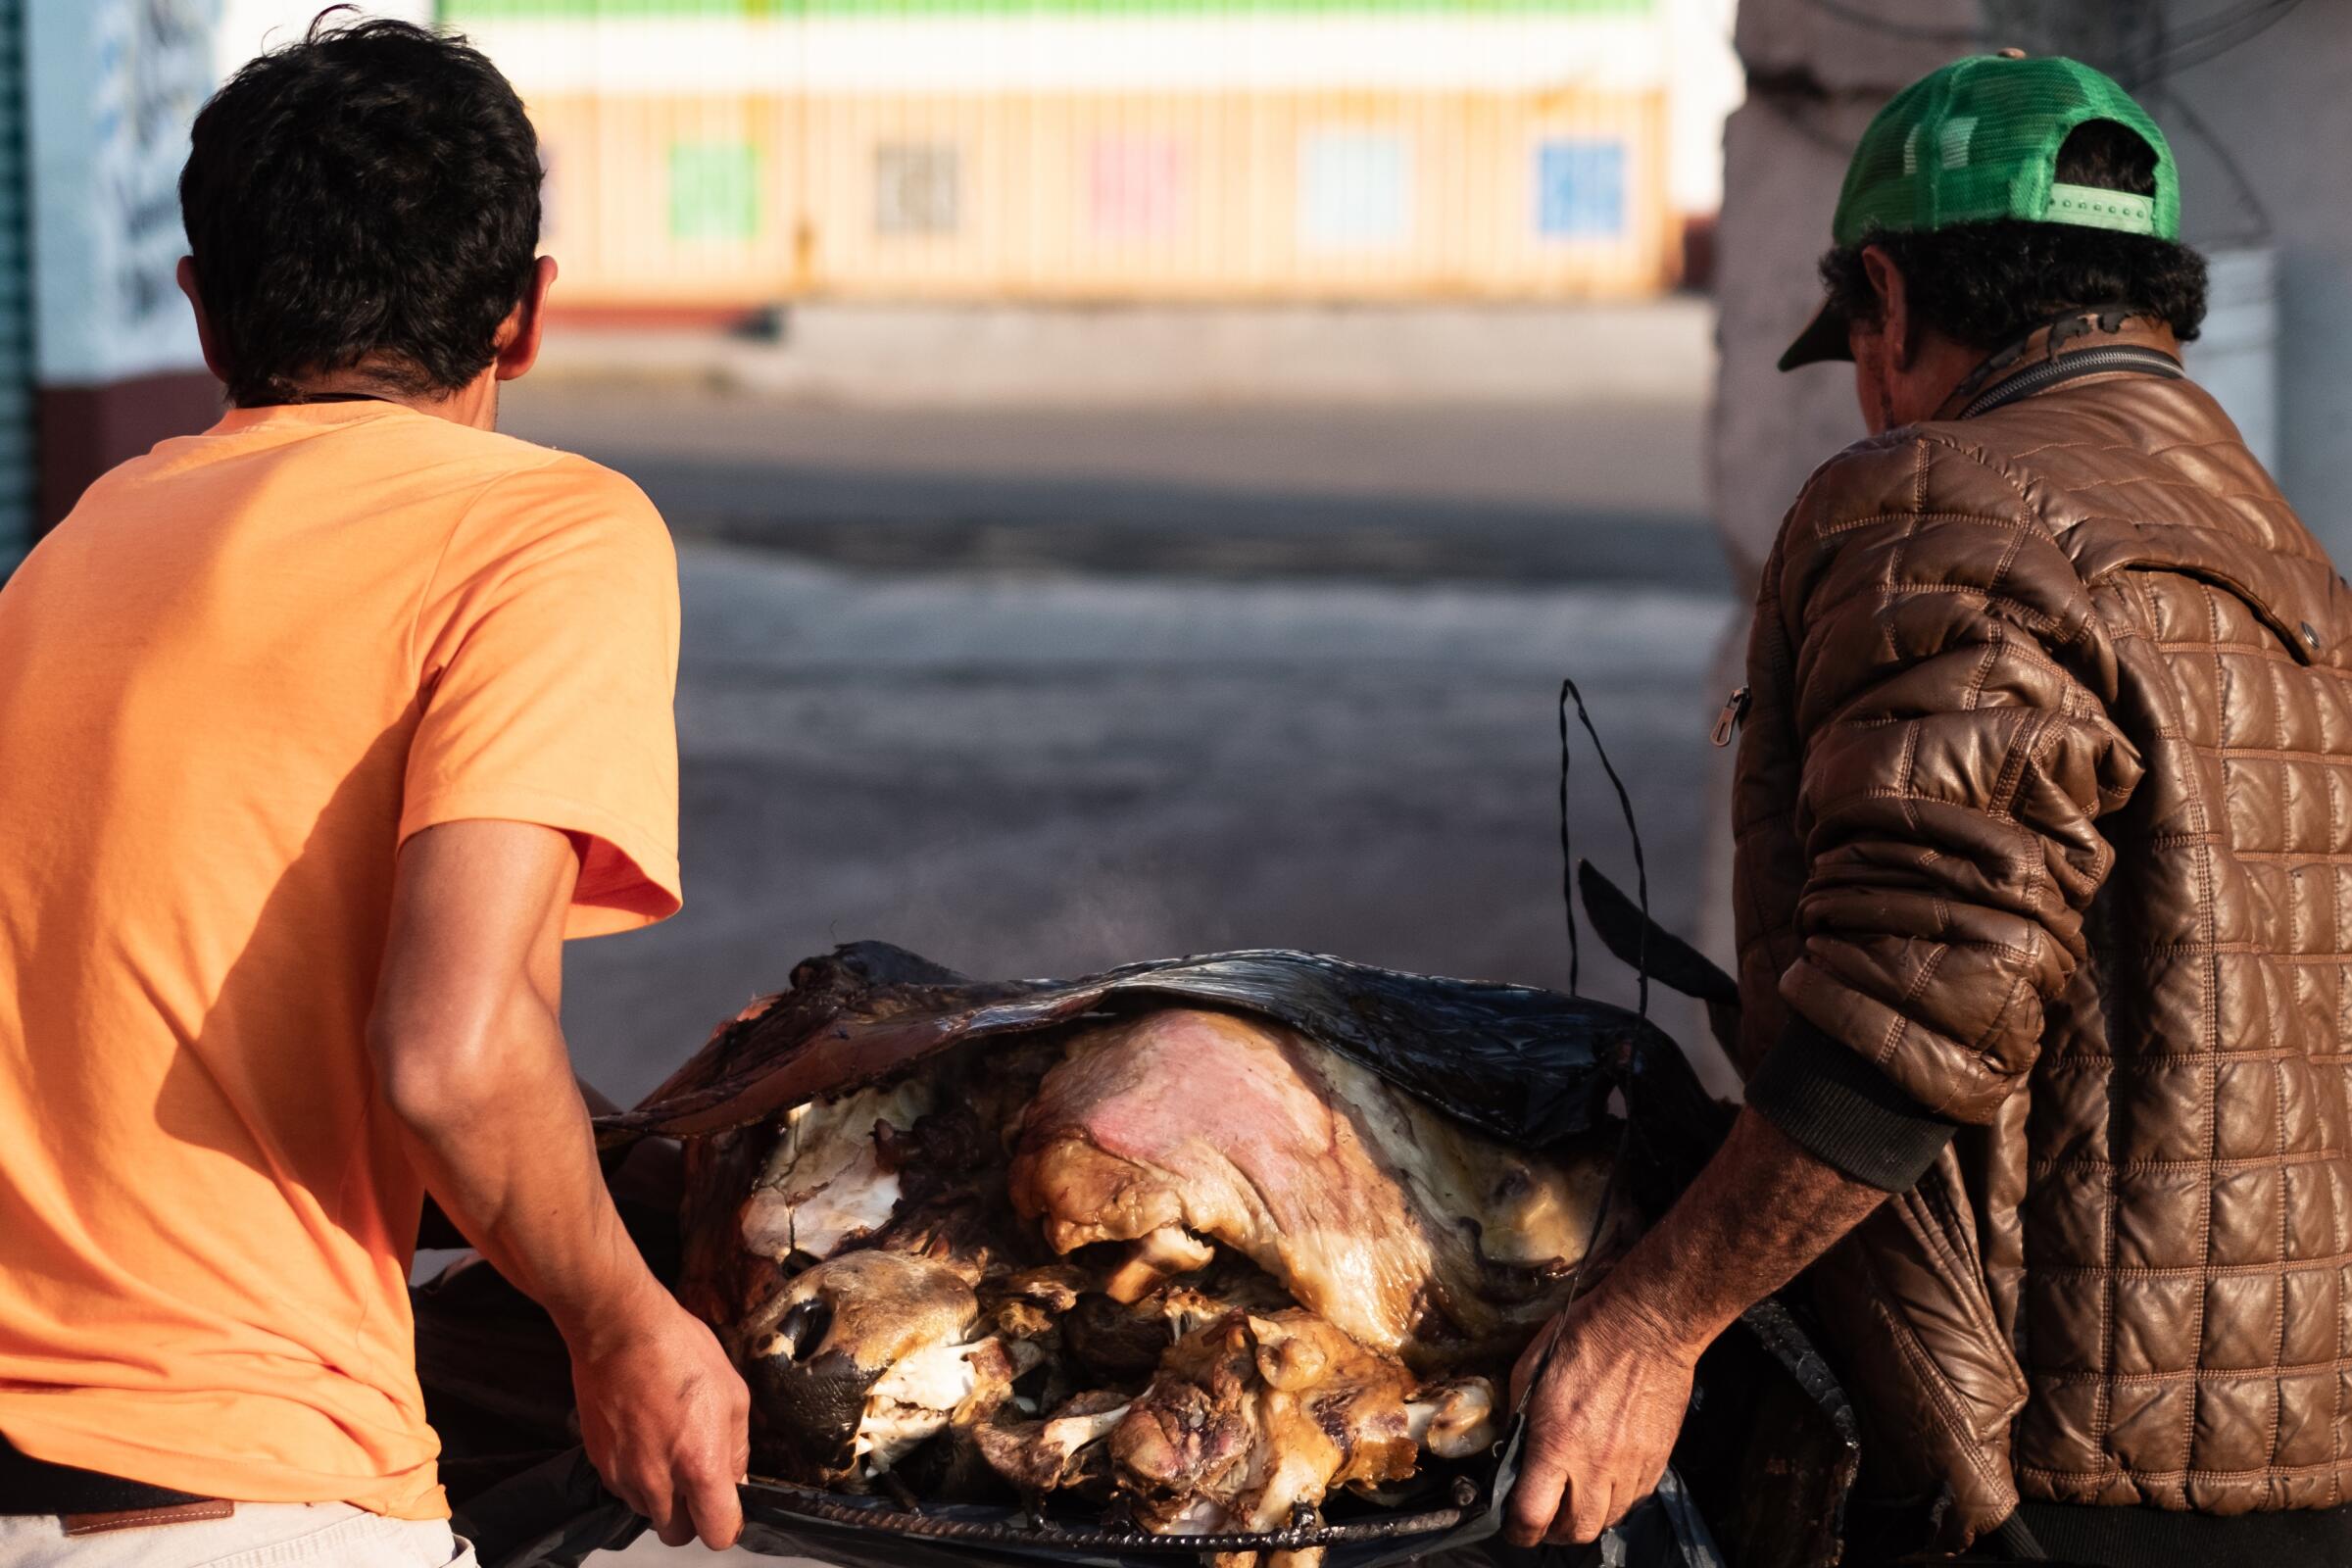 Barbacoa, slowly cooked in a hoyo for 14 hours, is carried out to prepared